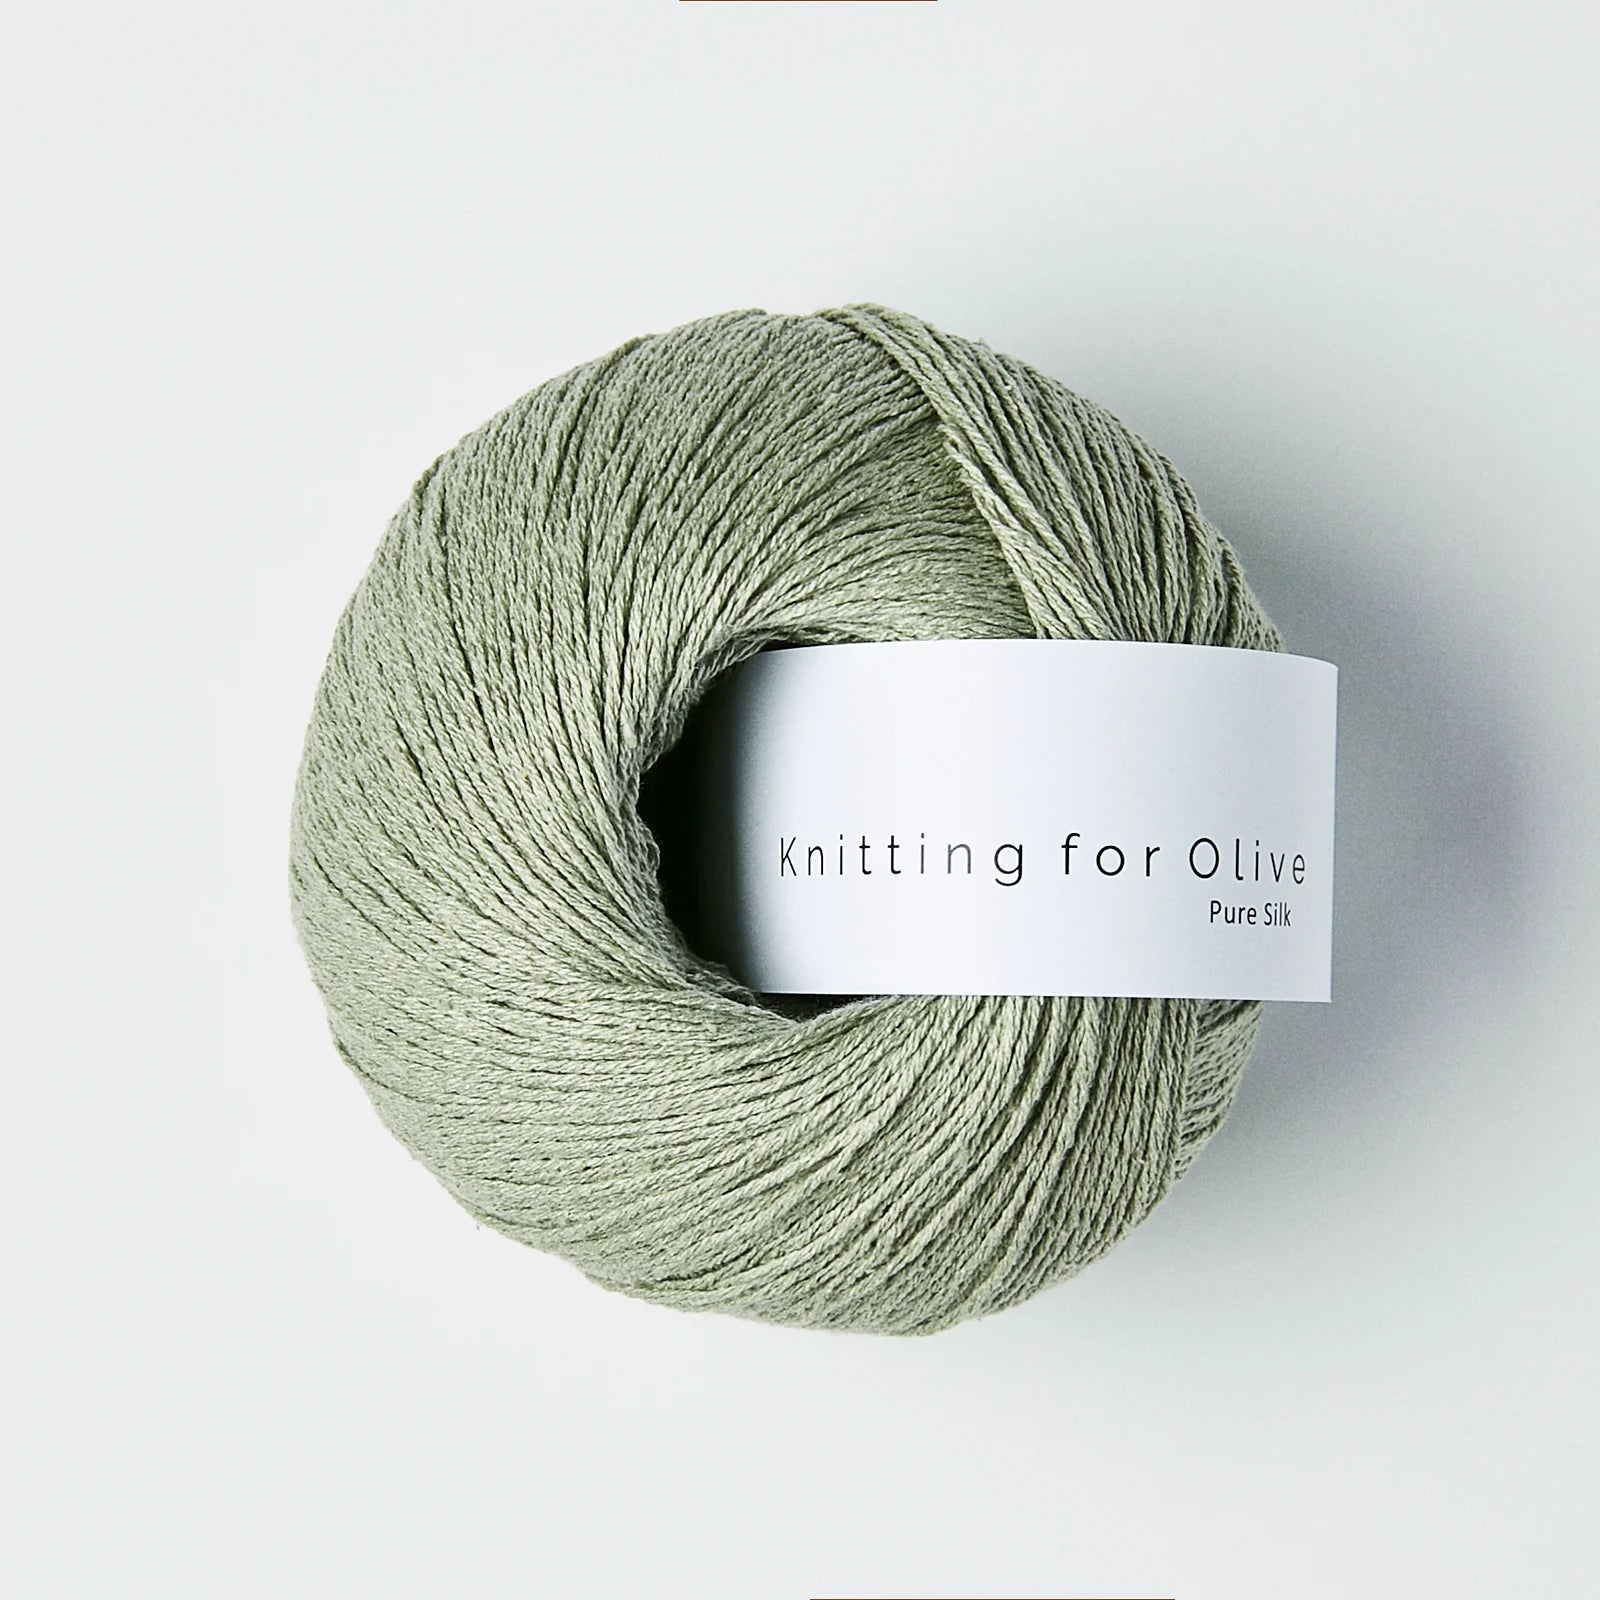 Knitting for Olive Pure Silk - Knitting for Olive - Dusty Artichoke - The Little Yarn Store